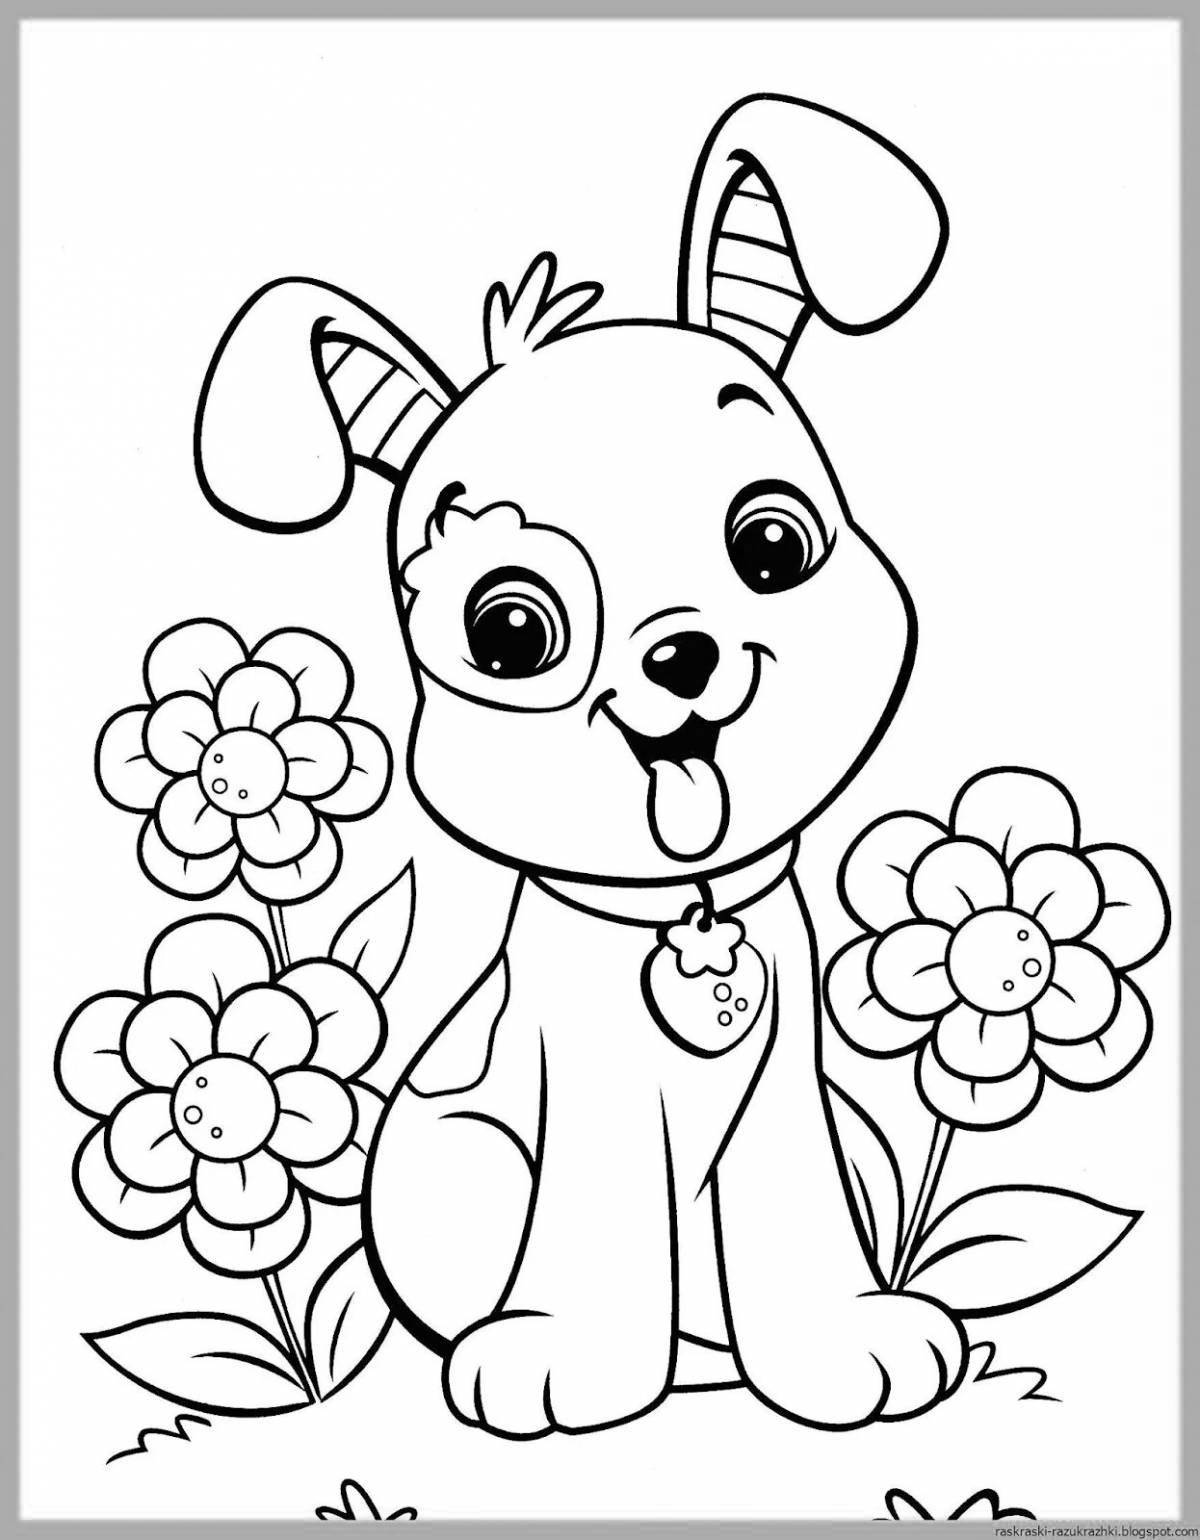 Friendly dog ​​coloring book for kids 5-6 years old